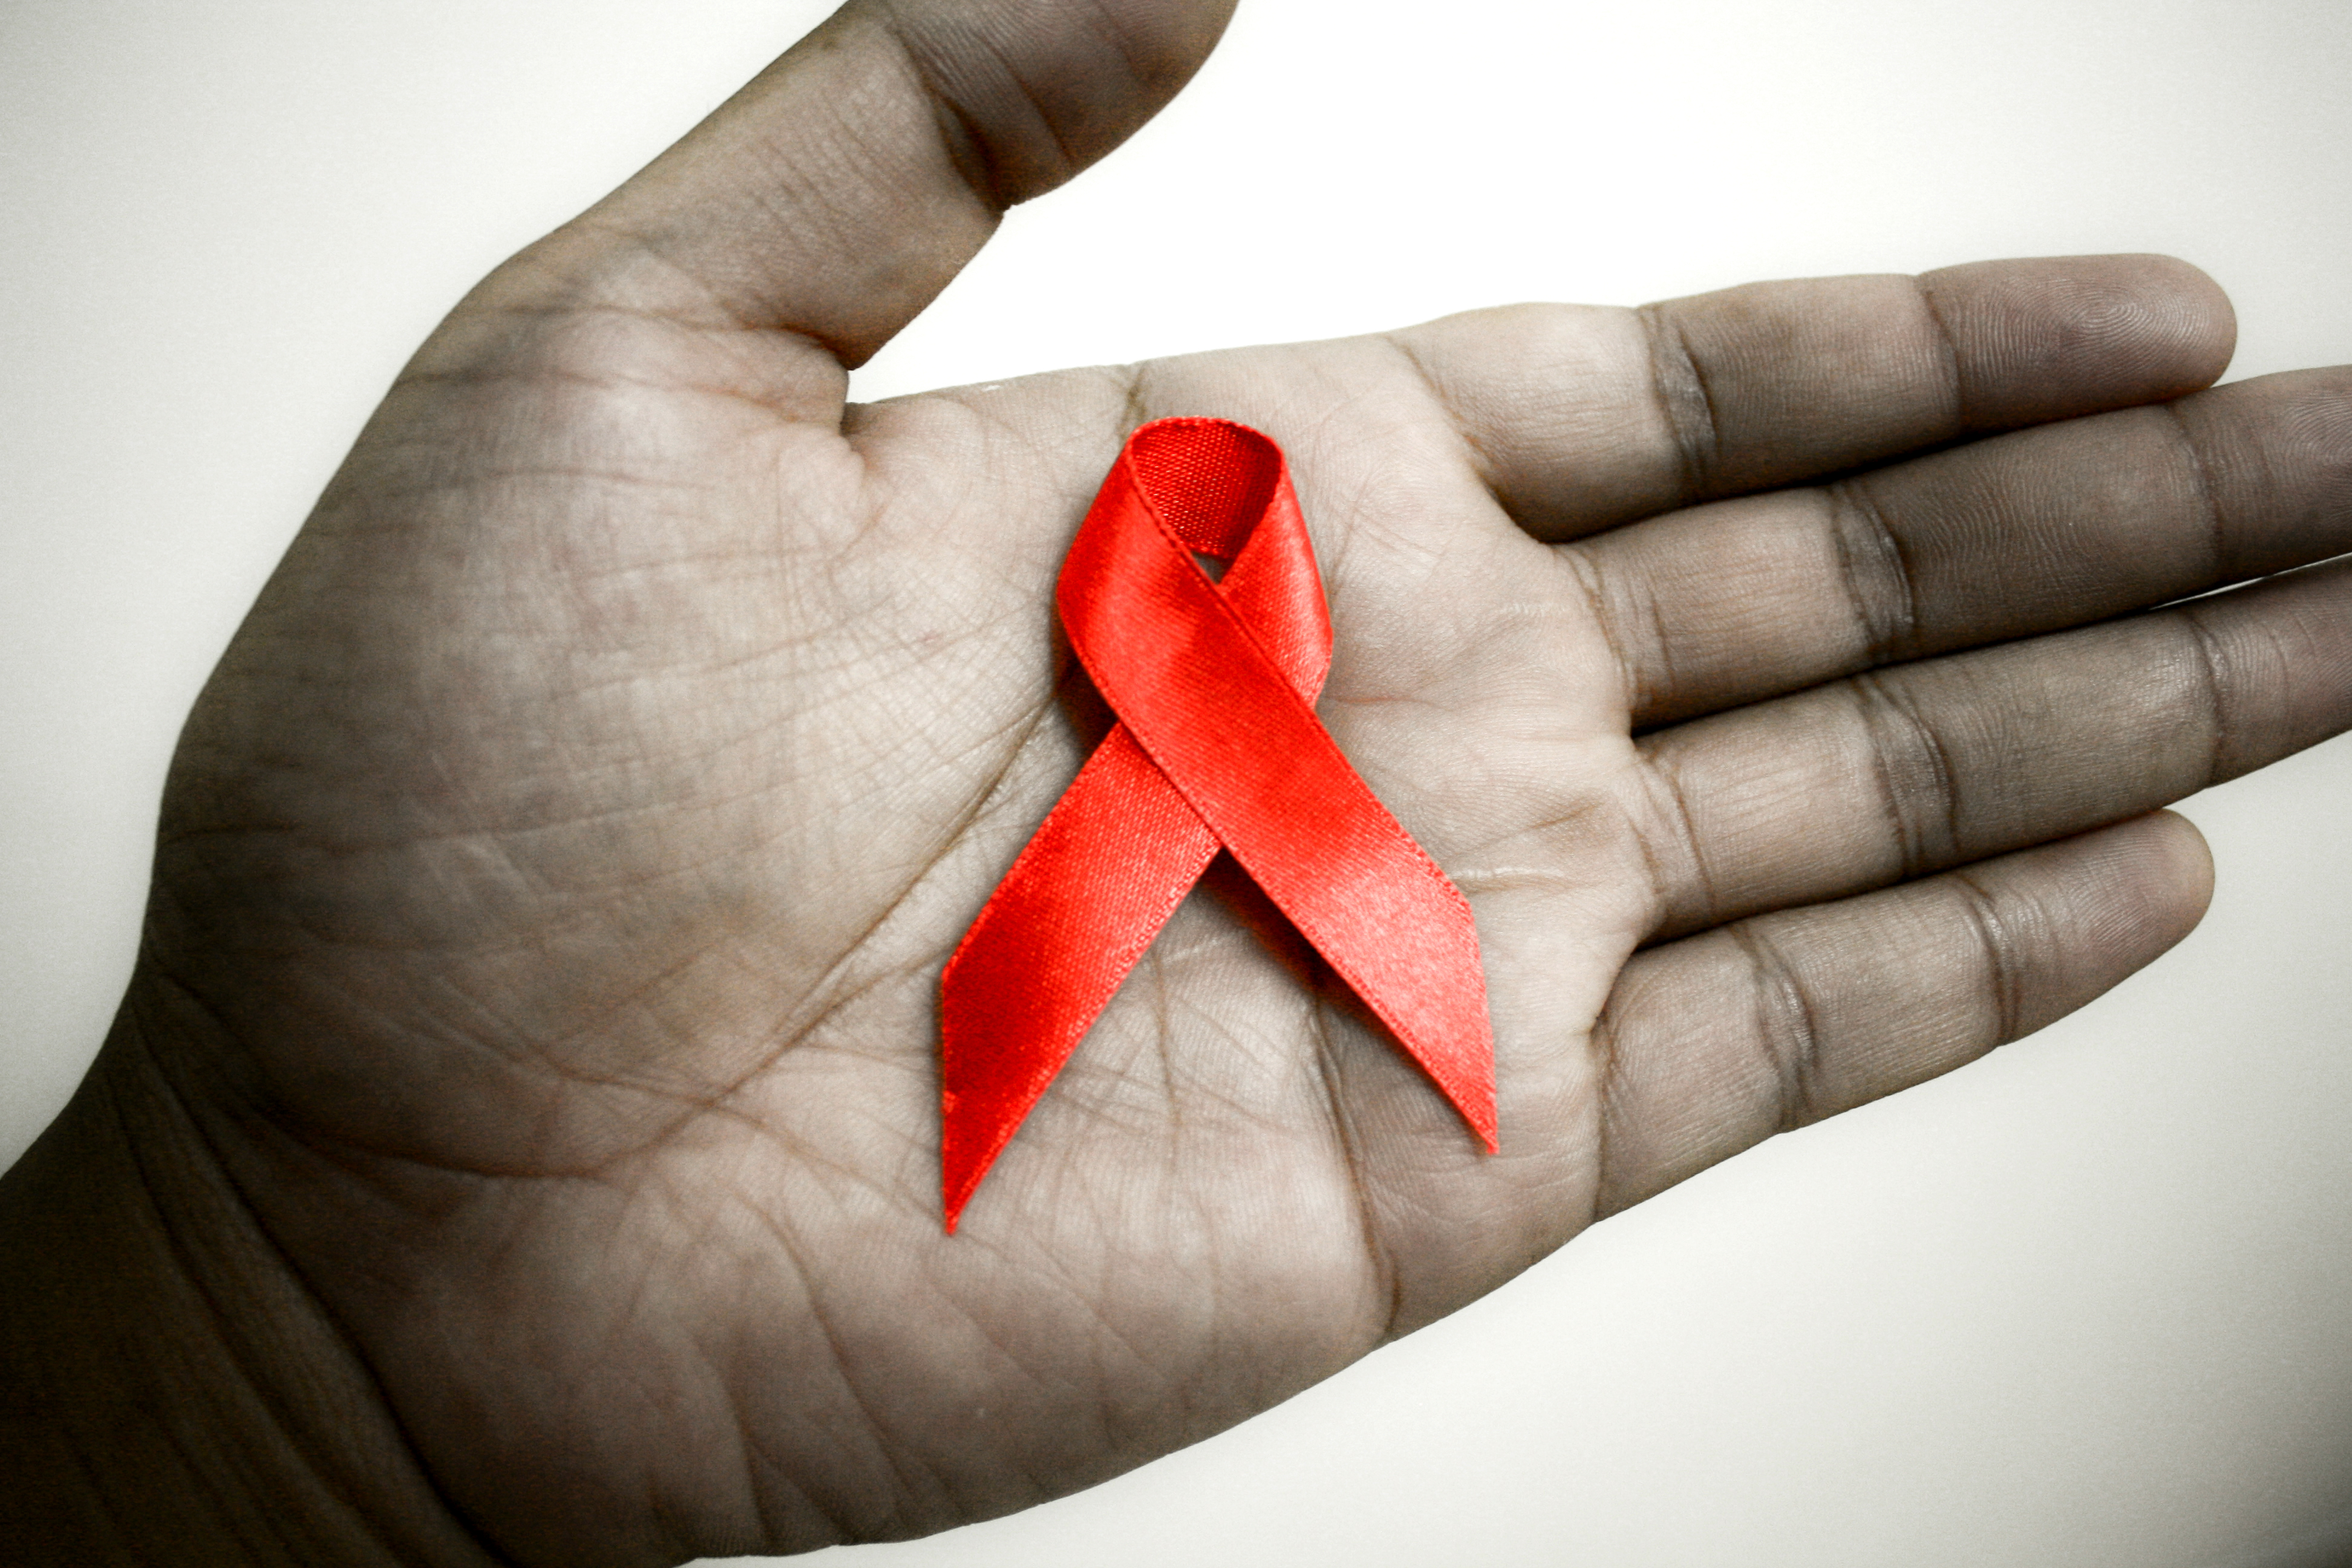 AVERT: Averting HIV and AIDS | The Borgen Project